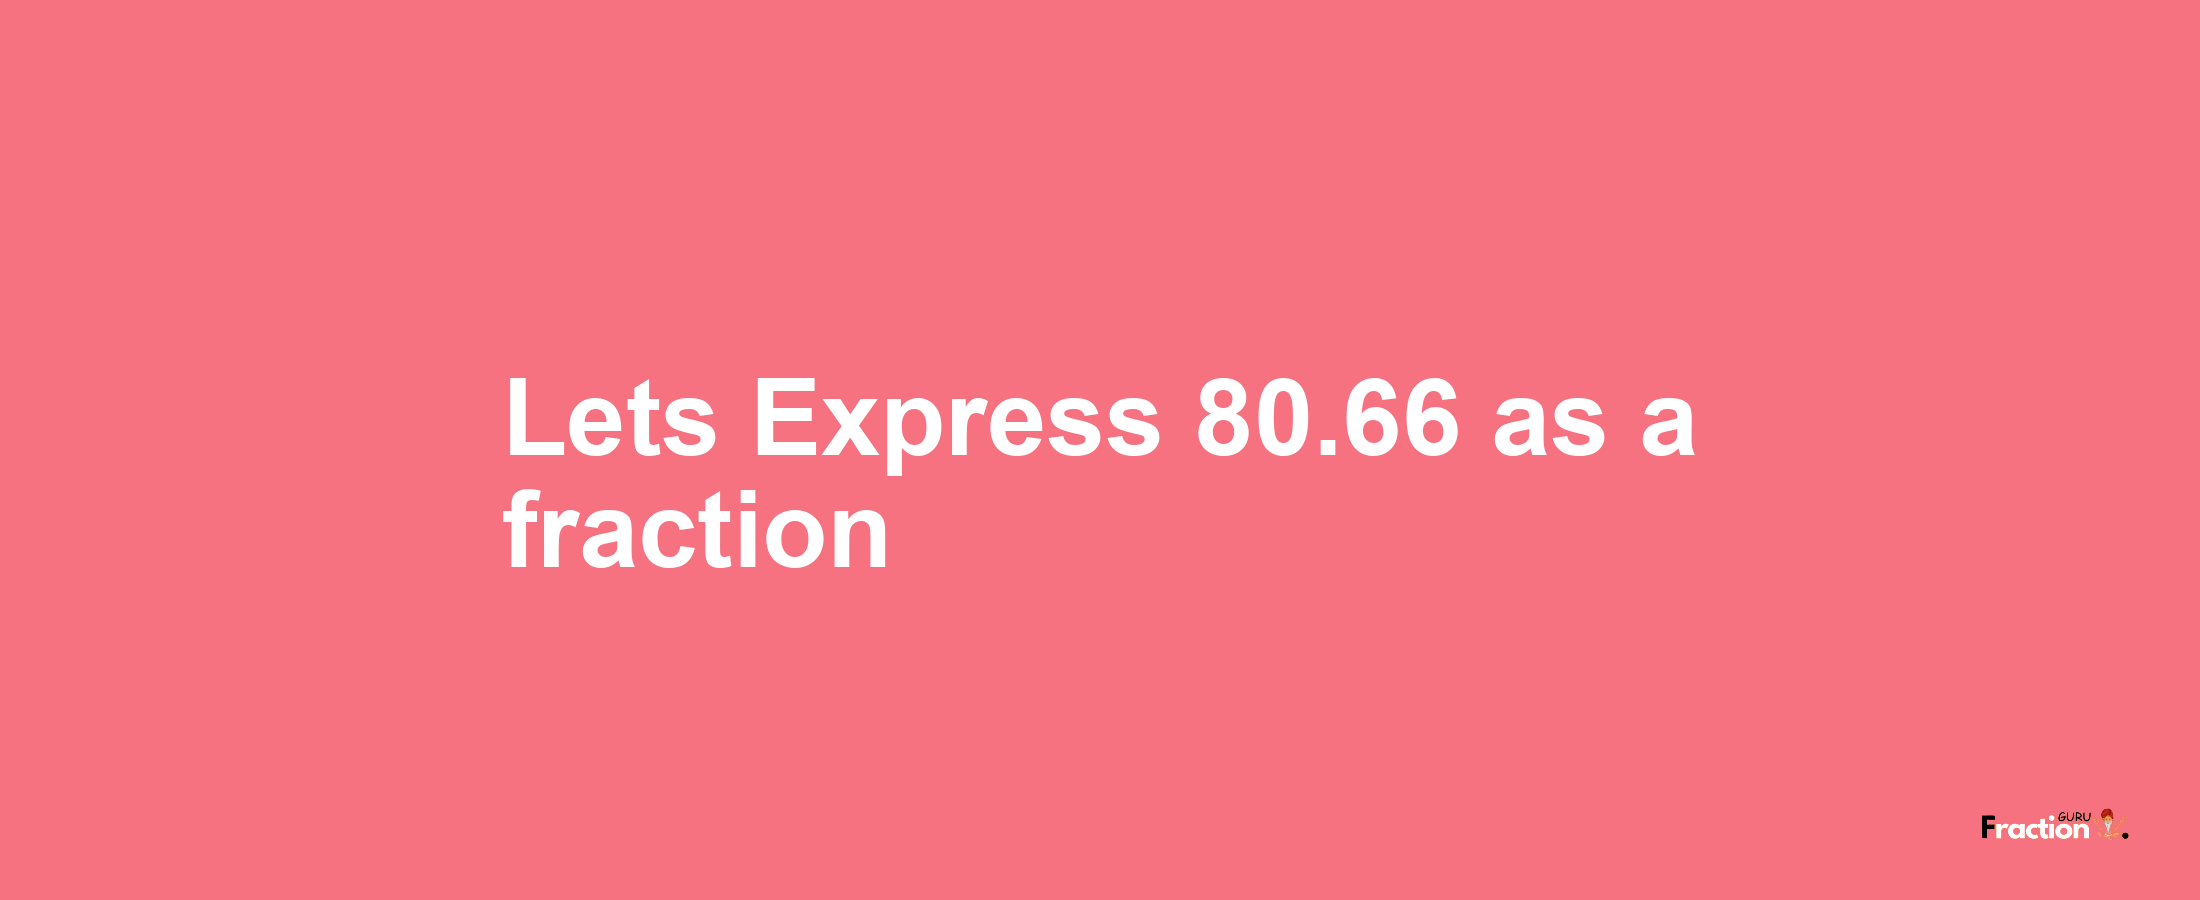 Lets Express 80.66 as afraction